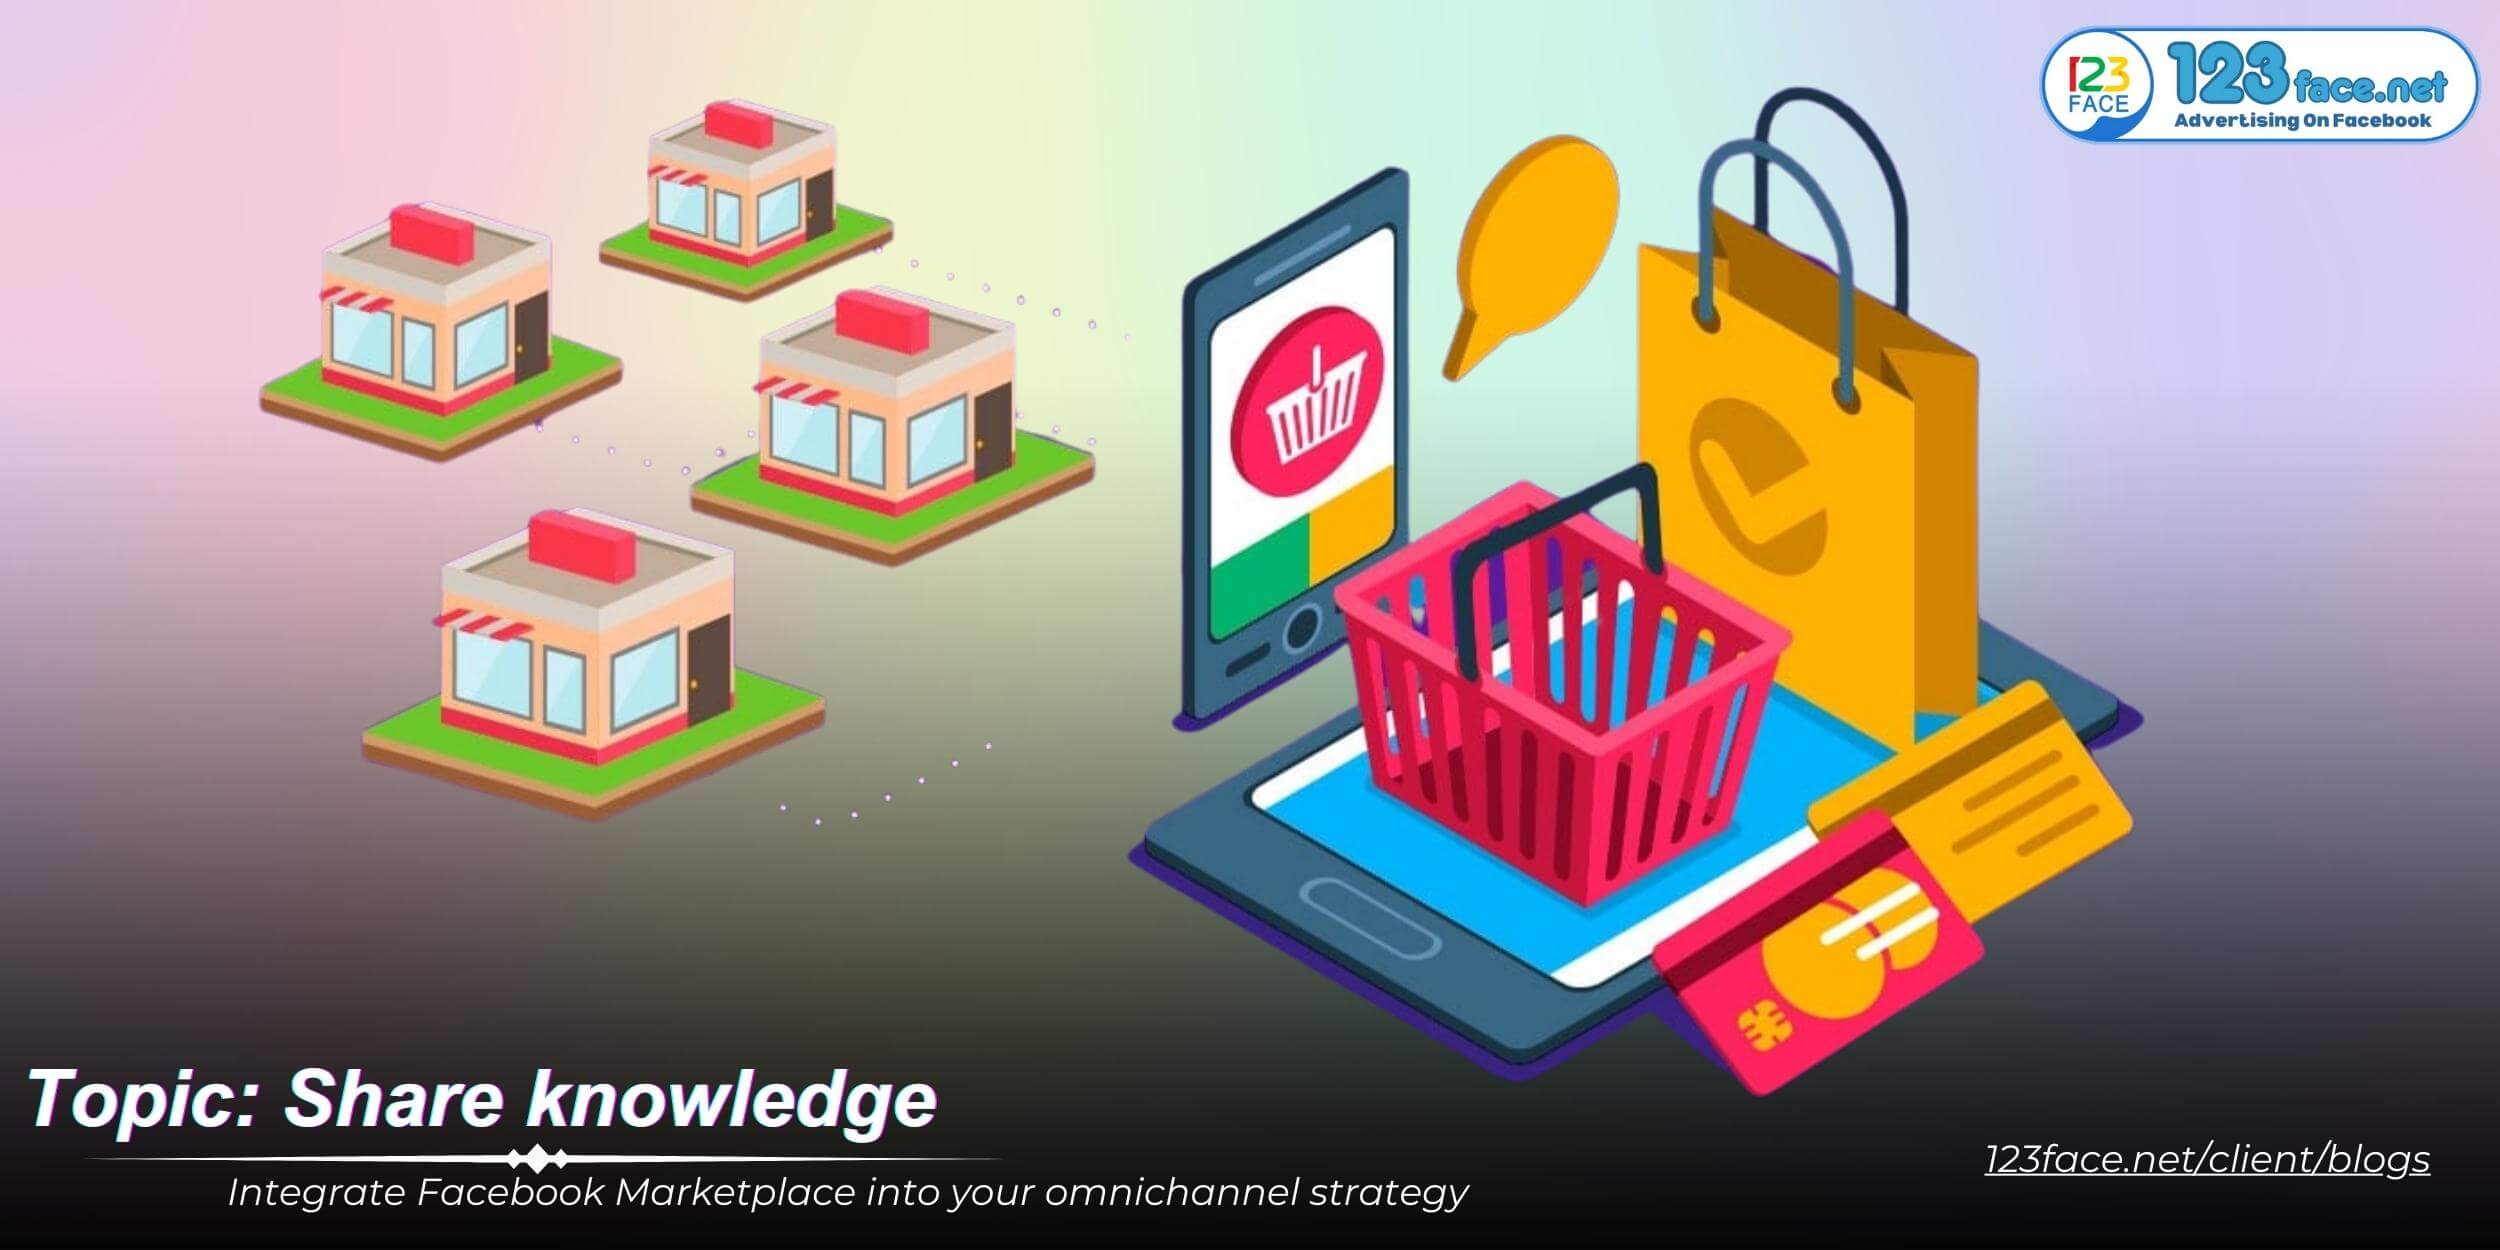 Integrate Facebook Marketplace into your omnichannel strategy